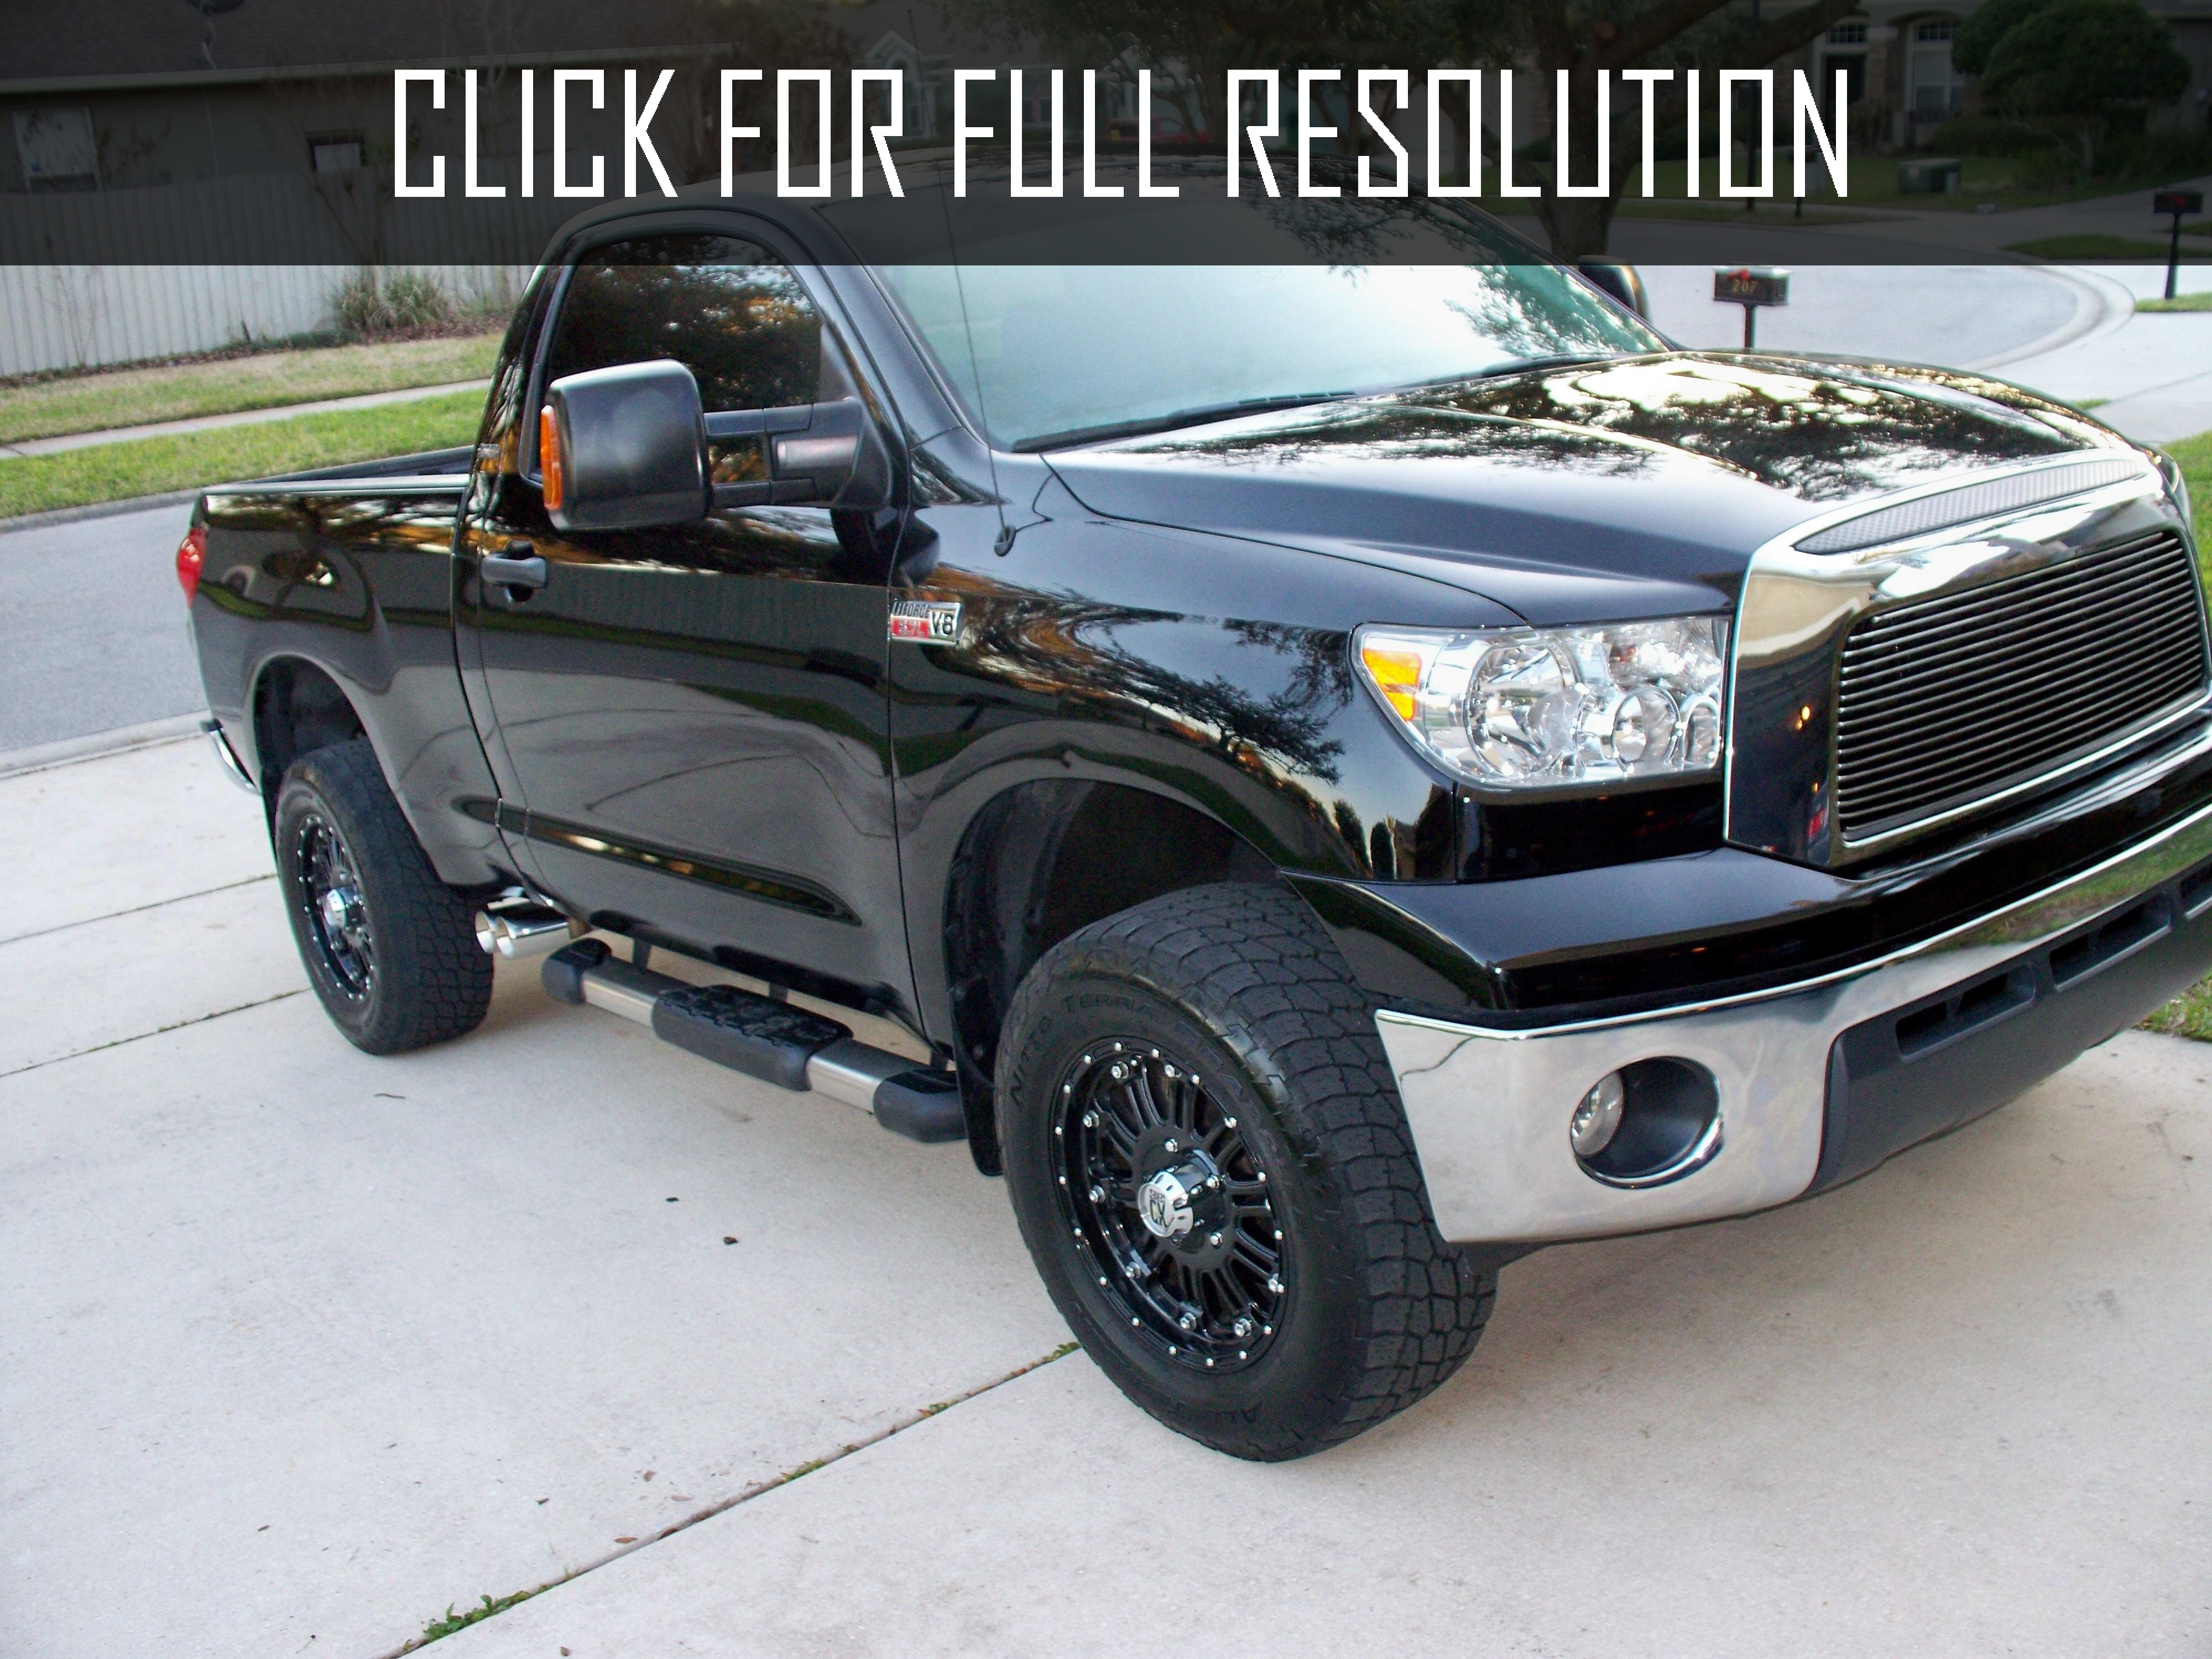 Toyota Tundra Single Cab amazing photo gallery, some information and